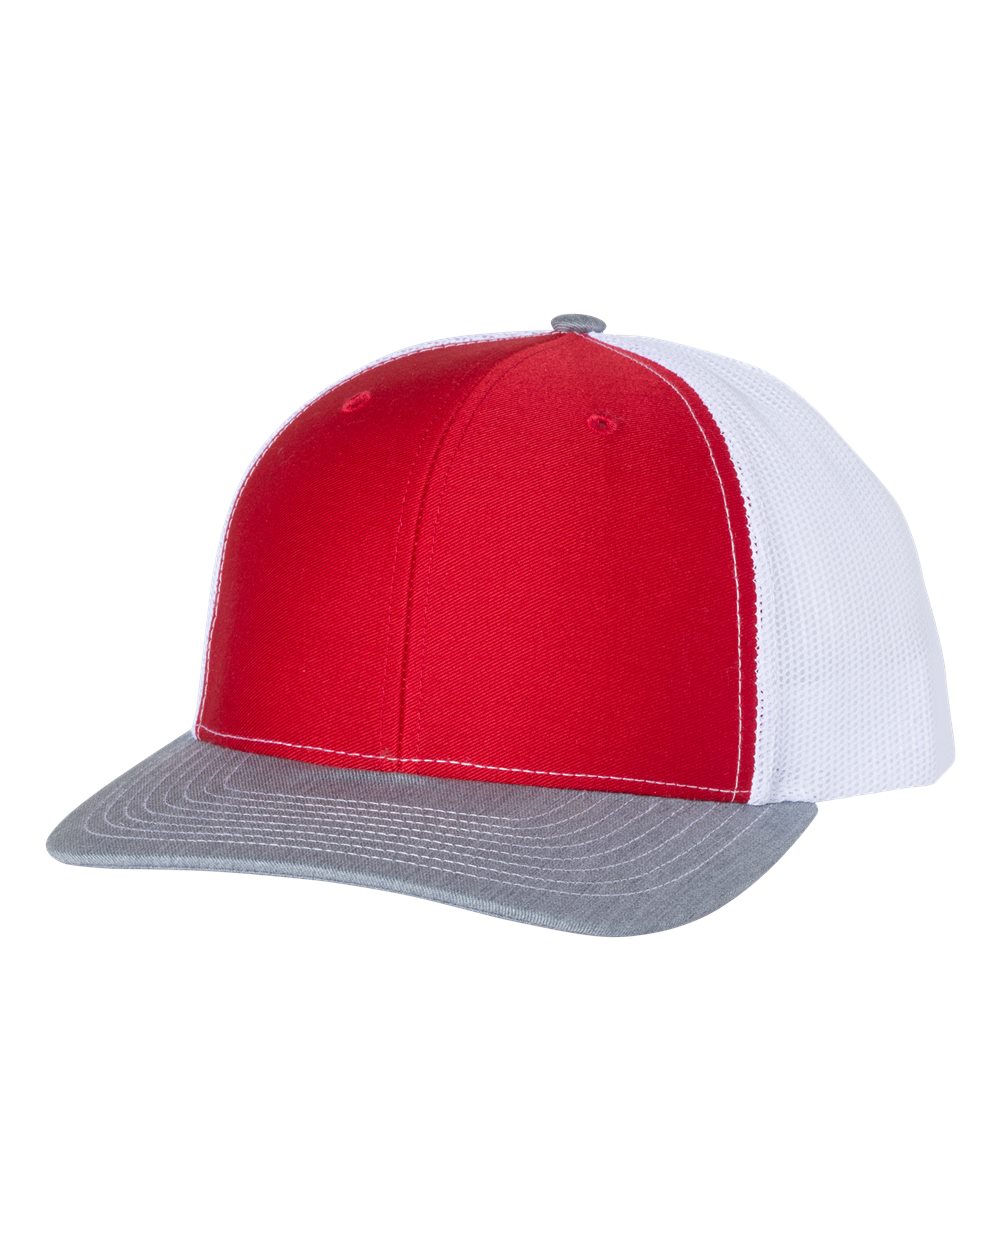 click to view Red/ White/ Heather Grey